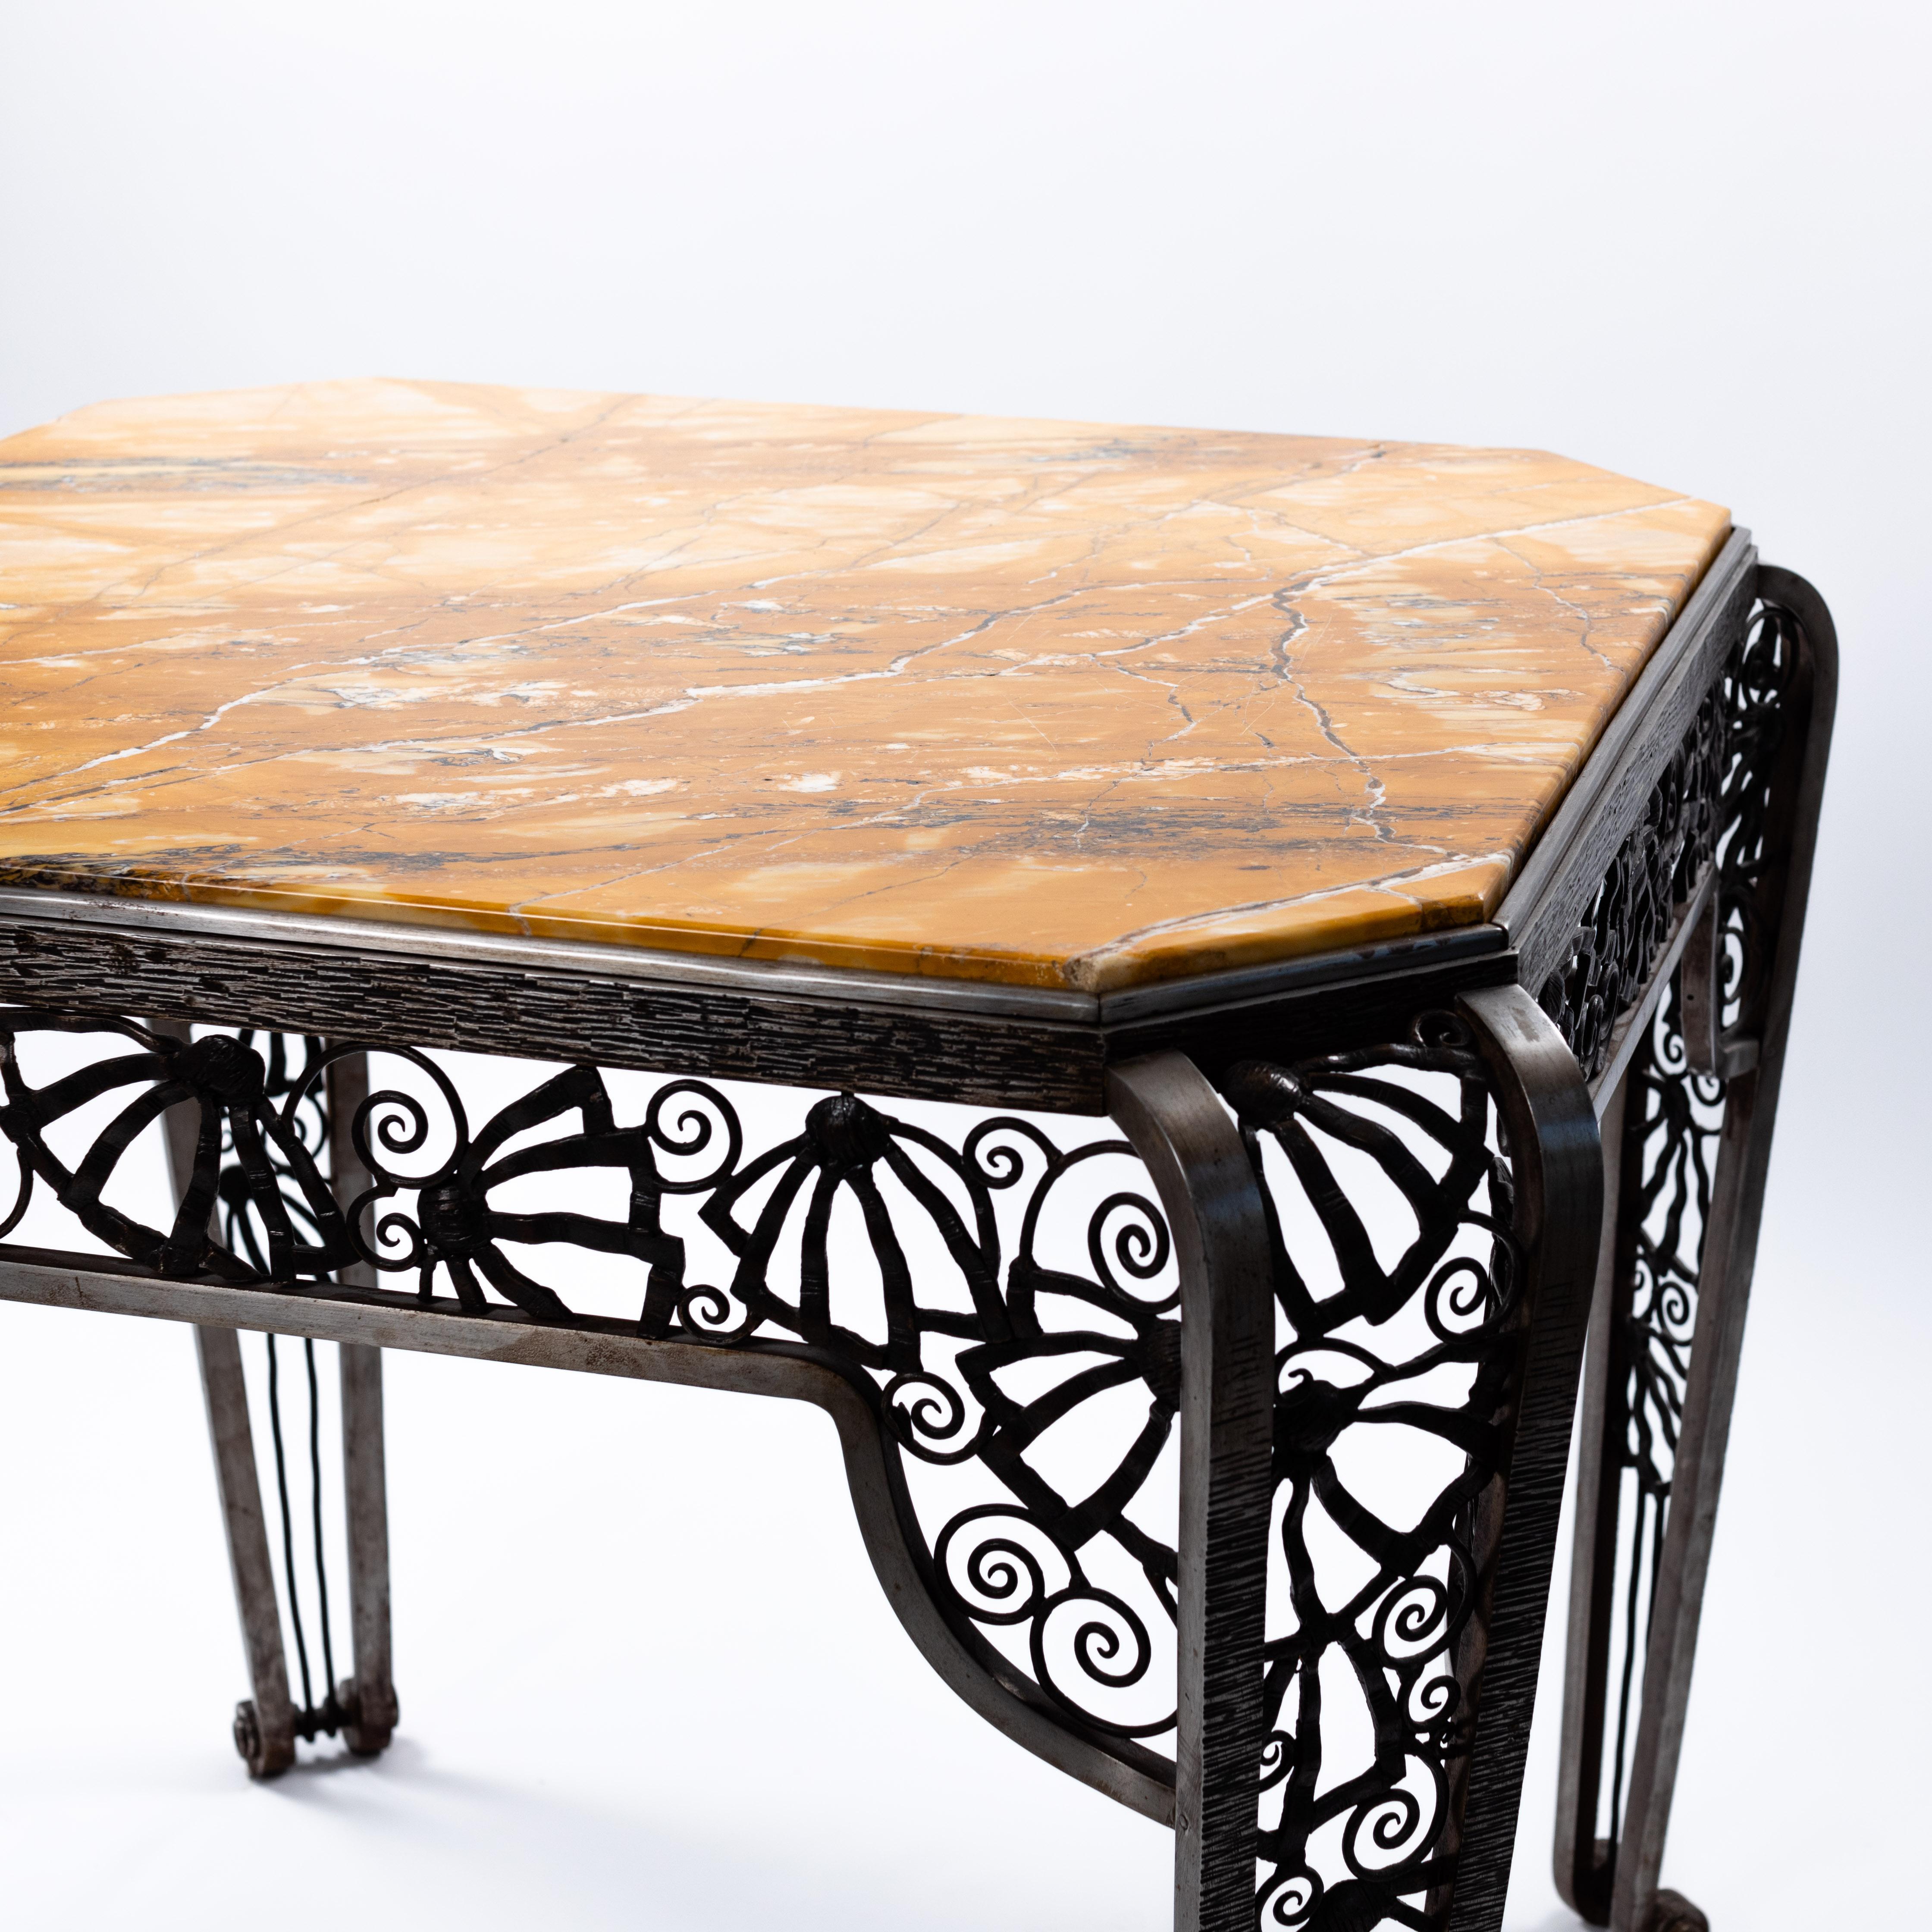 Mid-20th Century French Forged Iron Art Déco Center Table by Malatre Et Tonnelier, 1930s For Sale